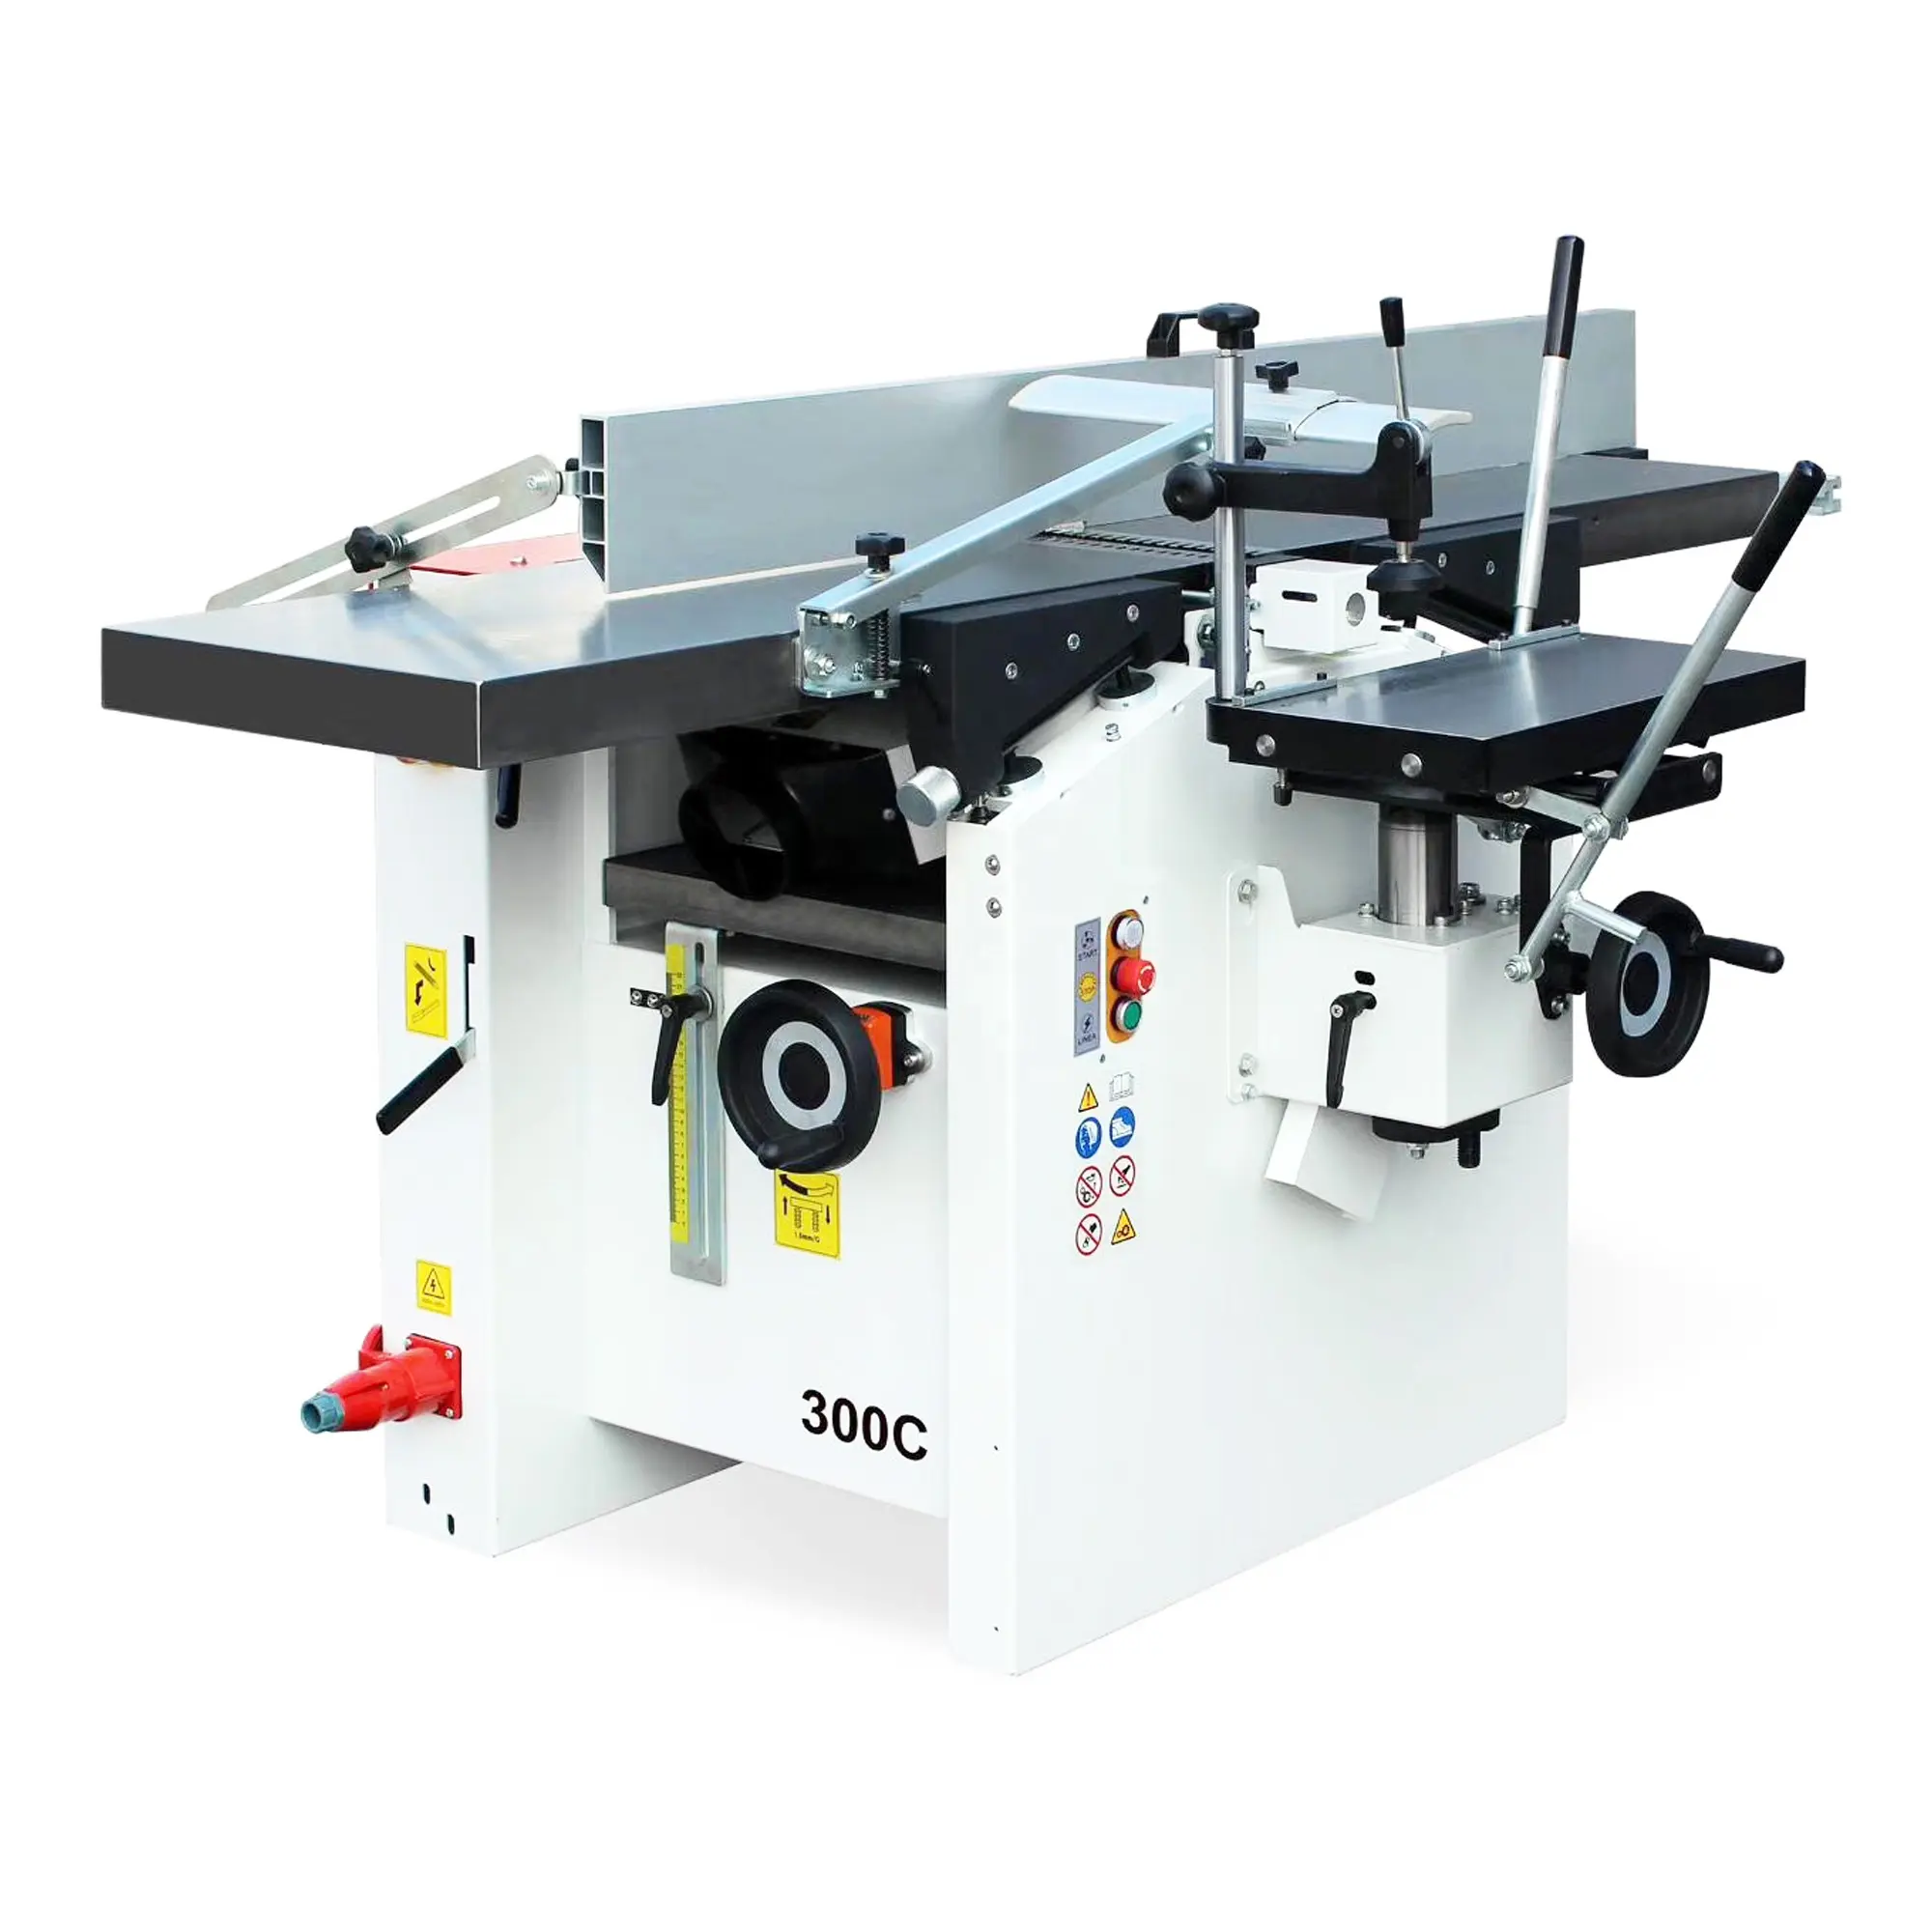 Item# 300C Woodworking Combination Machine with Planer Thicknesser Mortiser Functions